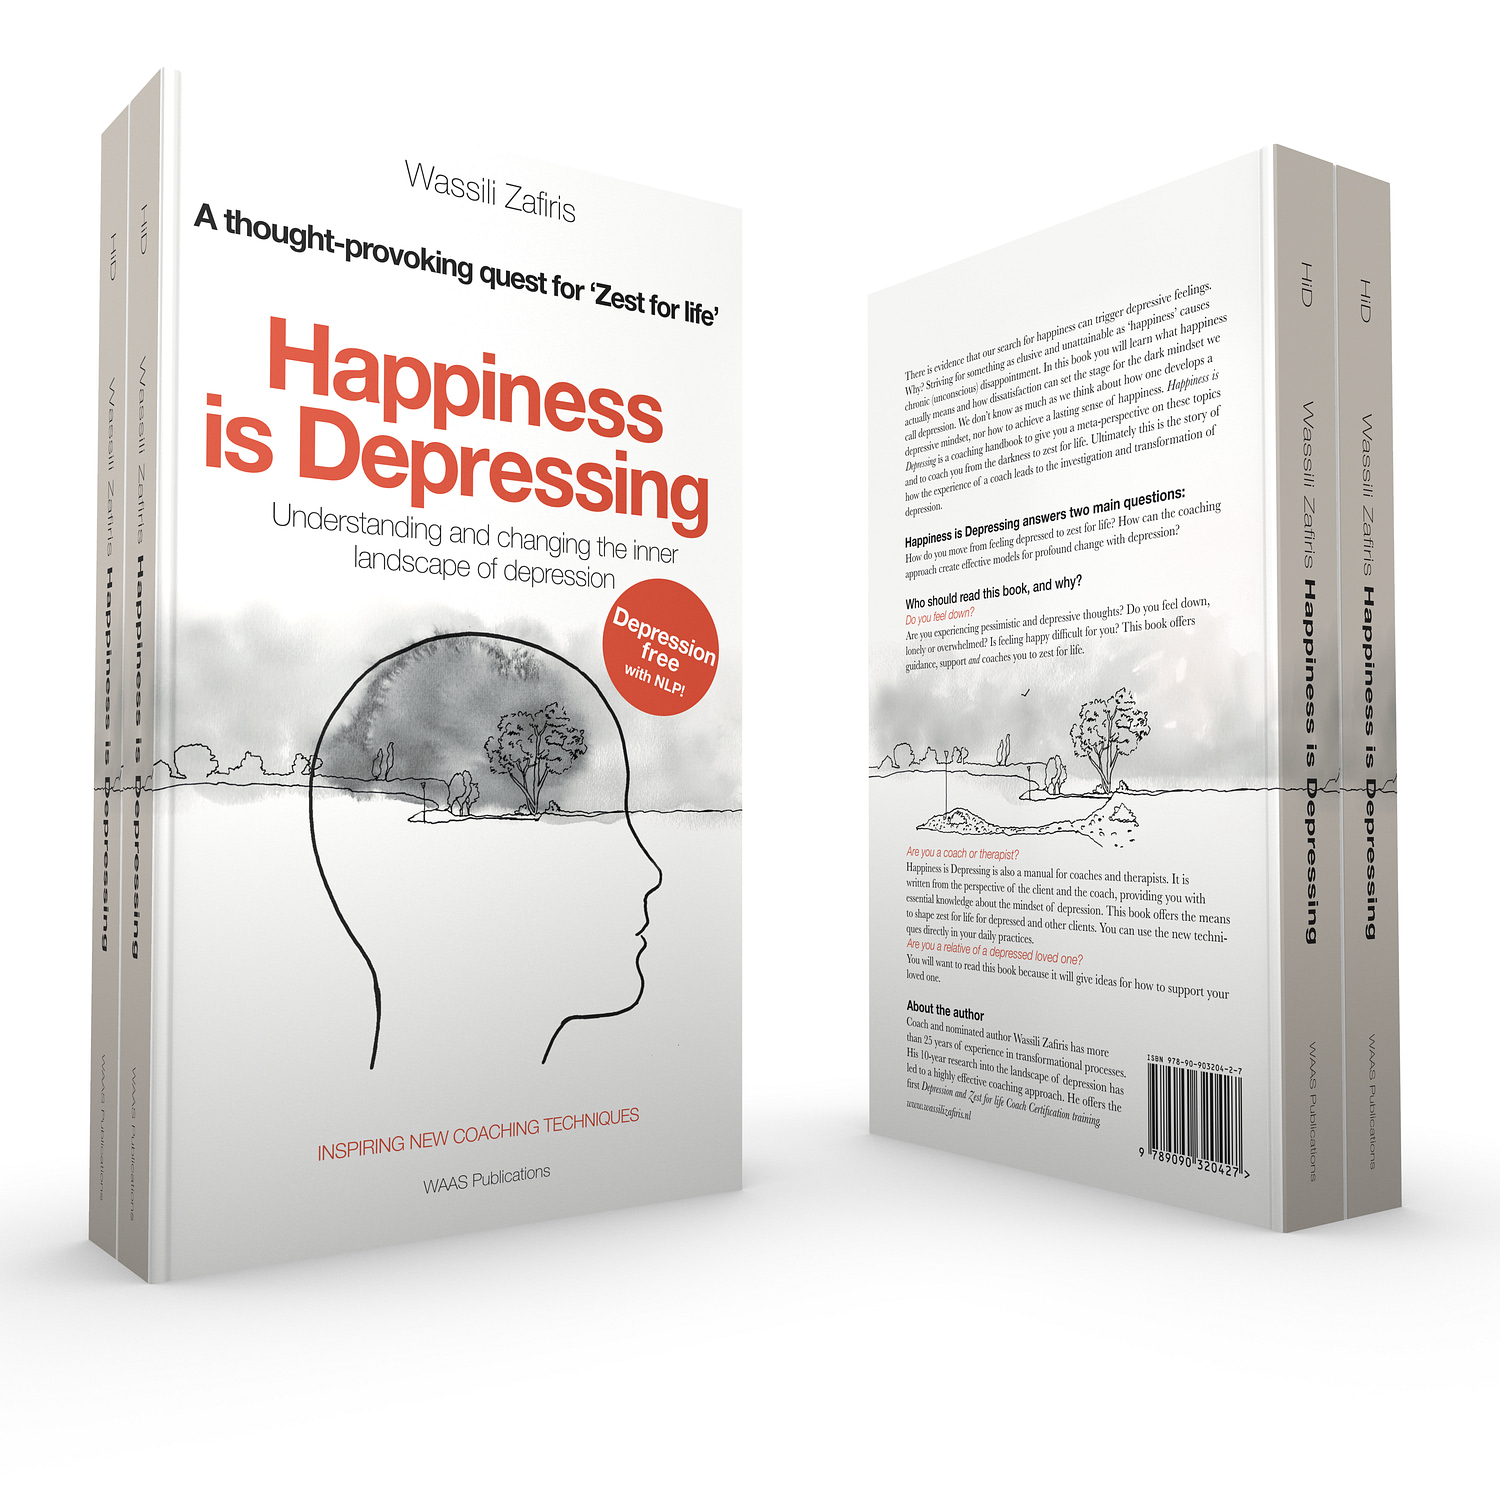 The new cure for depression could be easier than it seems. Wassili Zafiris. Happiness is Depressing.